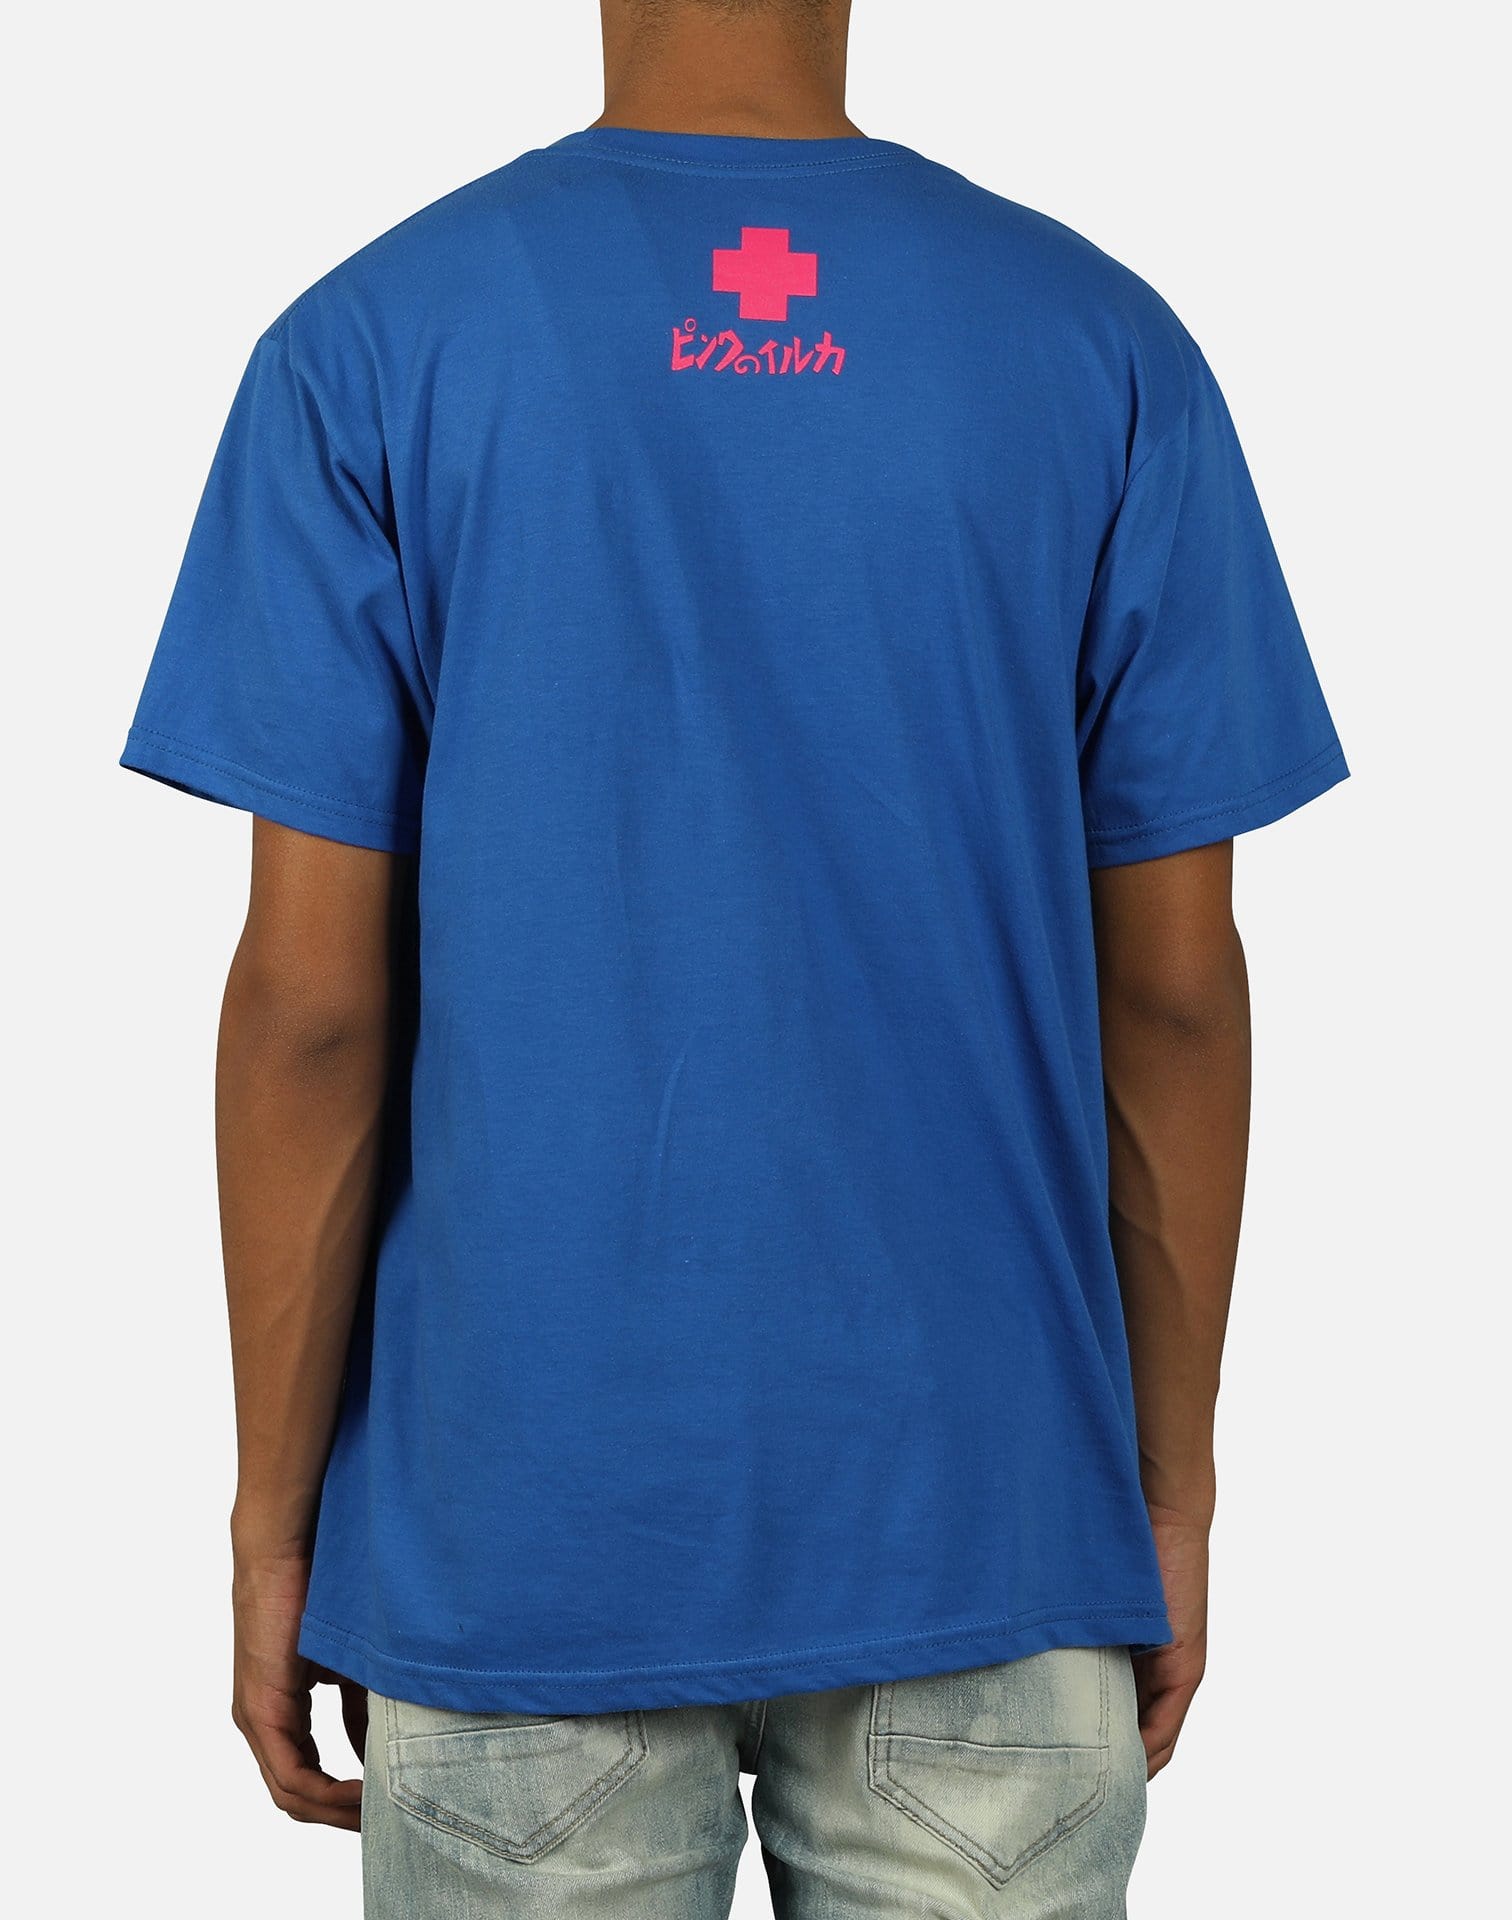 Pink Dolphin Men's Dolphin Crunch Tee